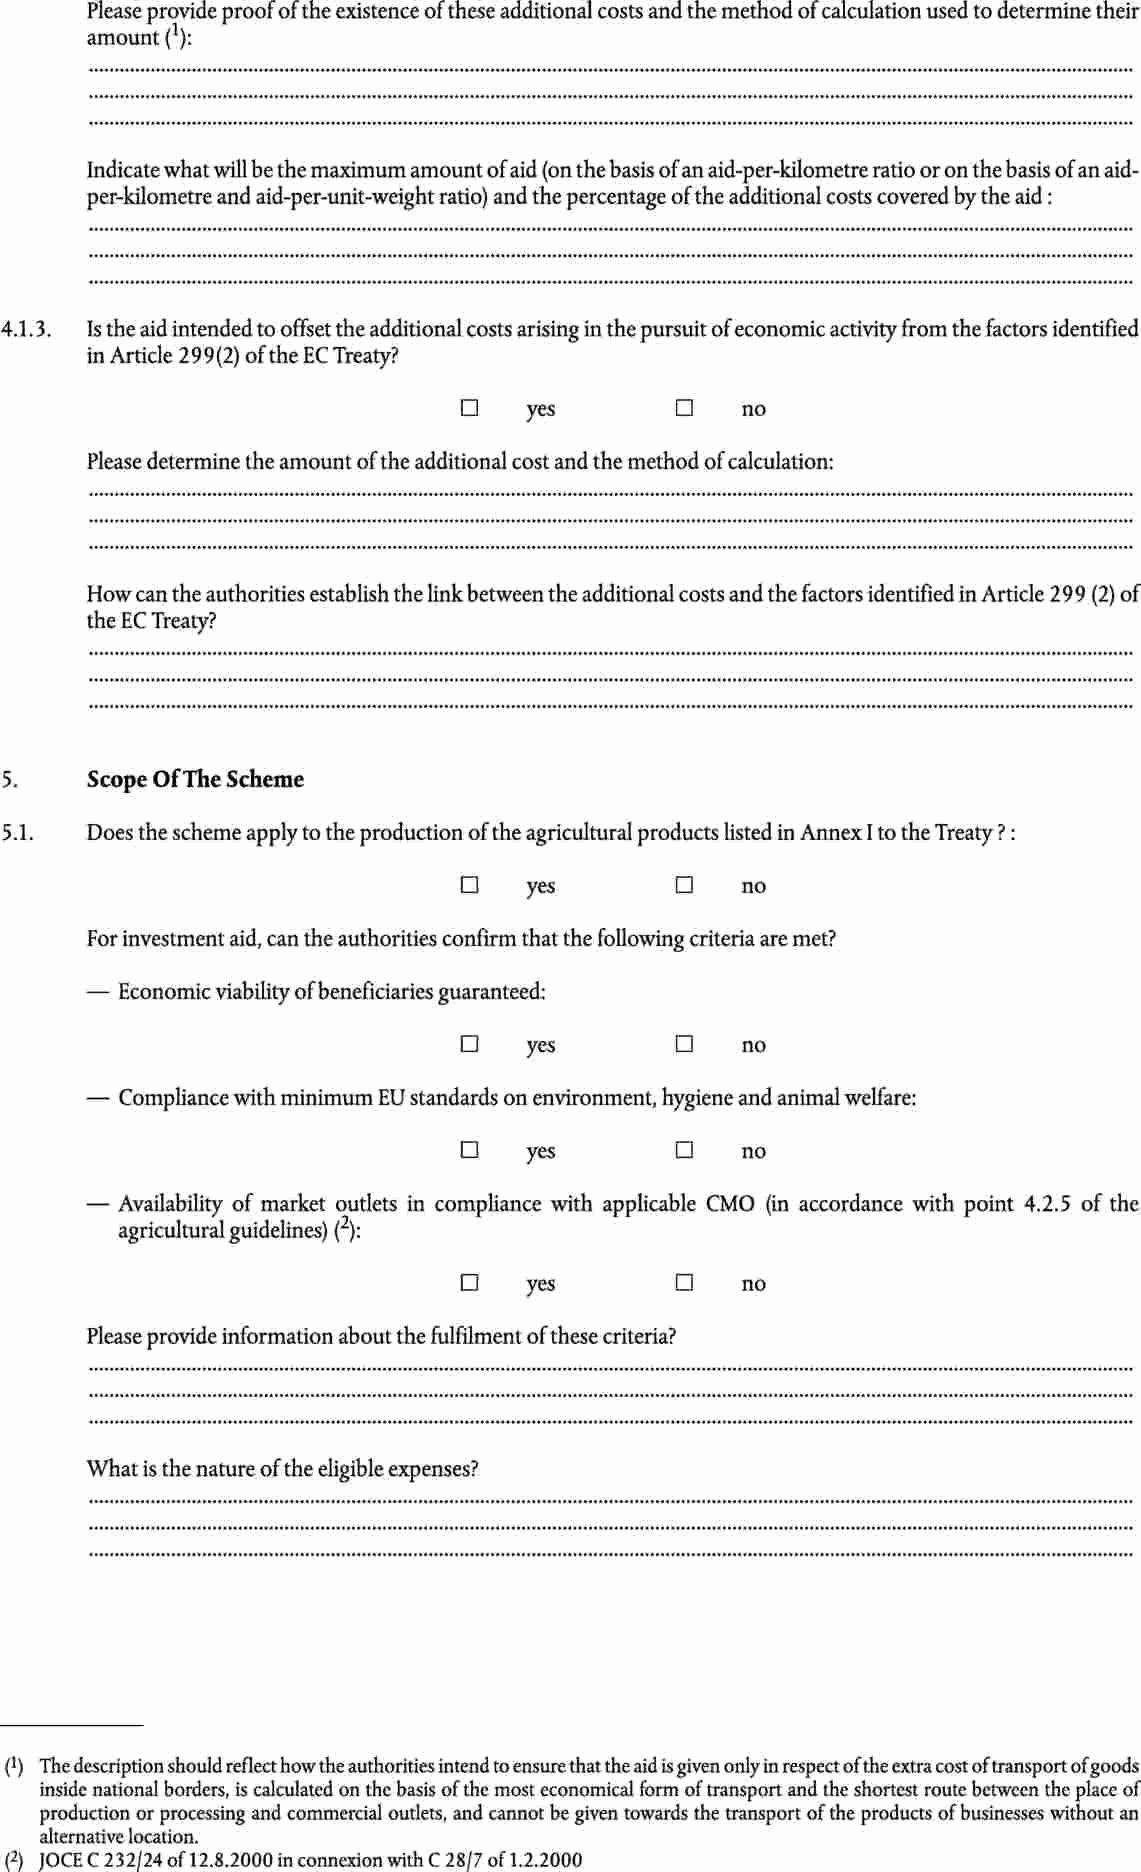 Simple and Compound Interest Worksheet Best Of Simple and Pound Interest Practice Worksheet Answer Key